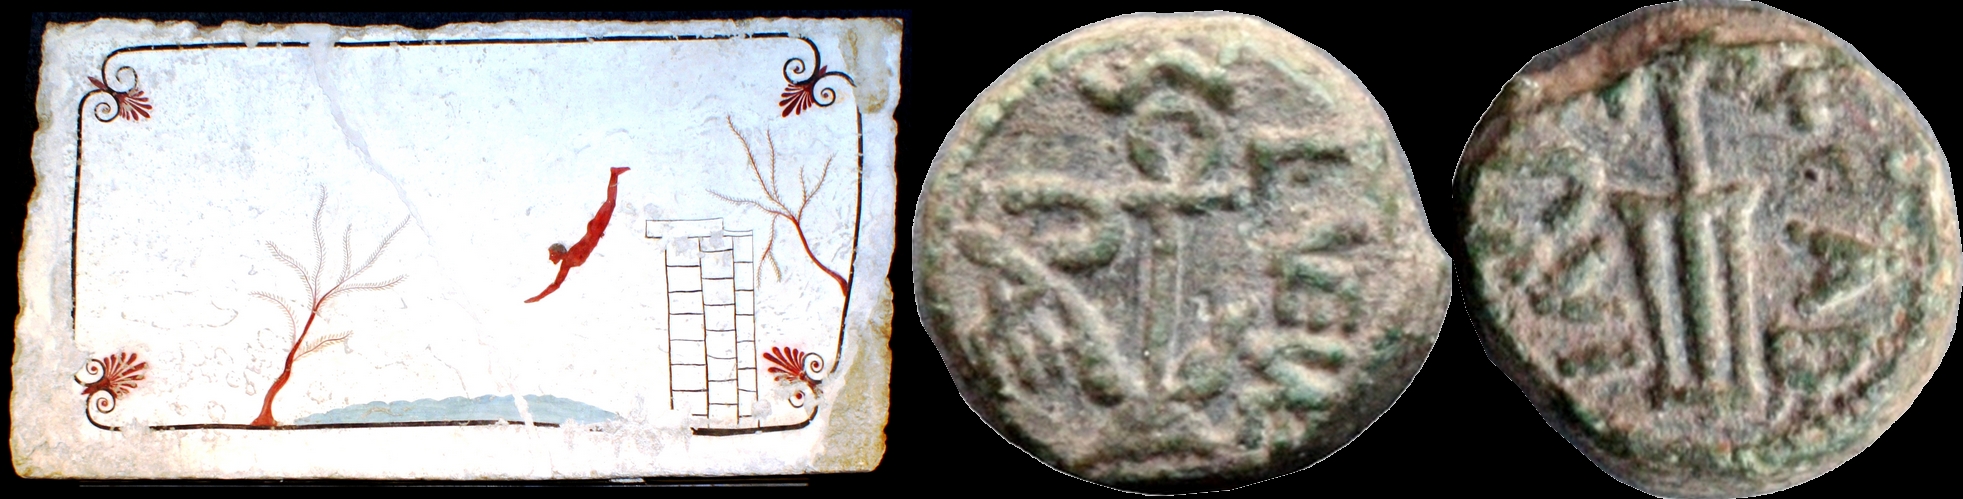 Paestum coin in the late Roman Republic with anchor and rudder, and Paestum's Greek-period Tomb of the Diver 480BC, the journey of the soul to the afterlife, into the unknown.